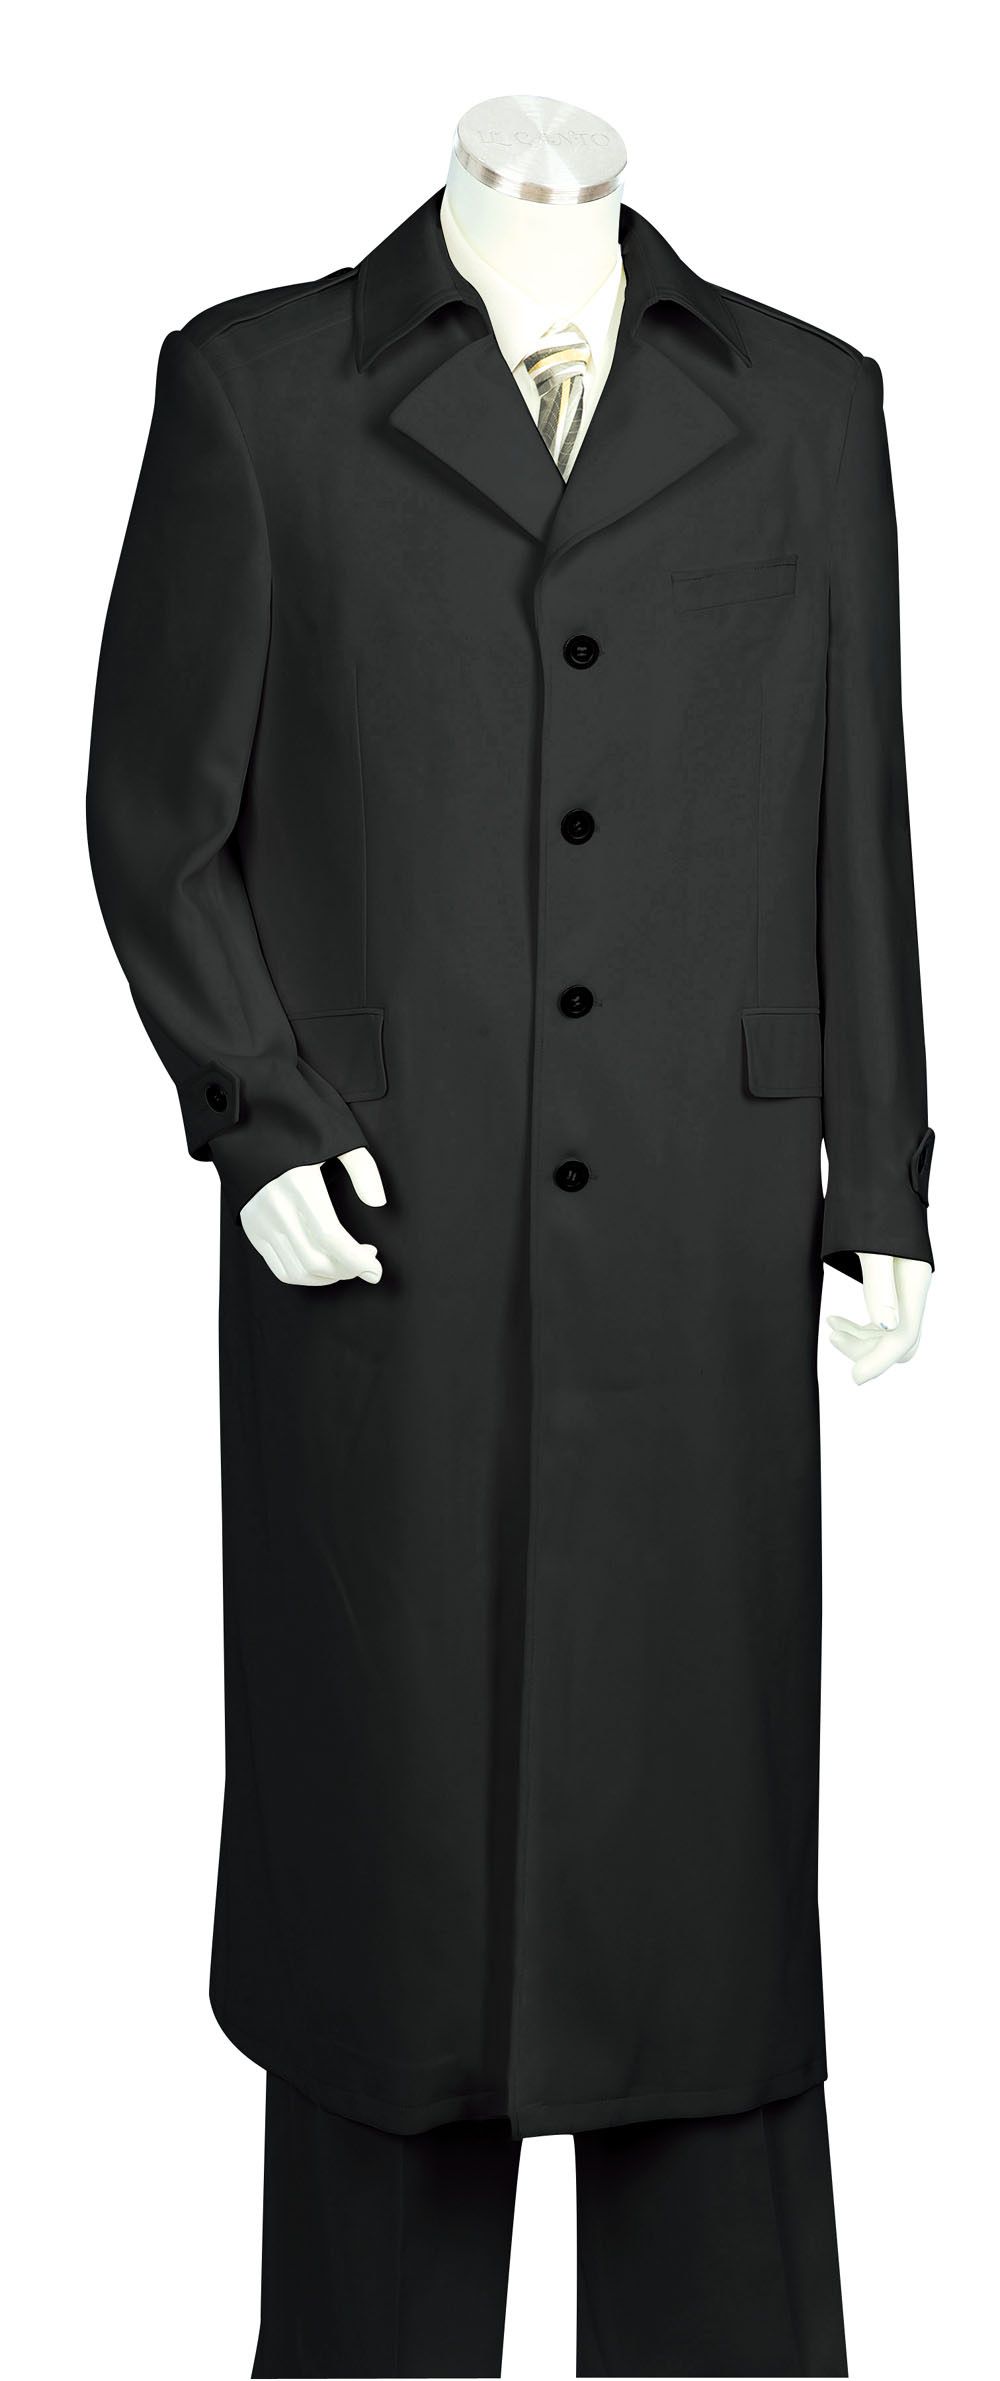 Canto Men's 2-Piece Urban-Zoot Suit with Pleated Coattail - Award-Winning Design